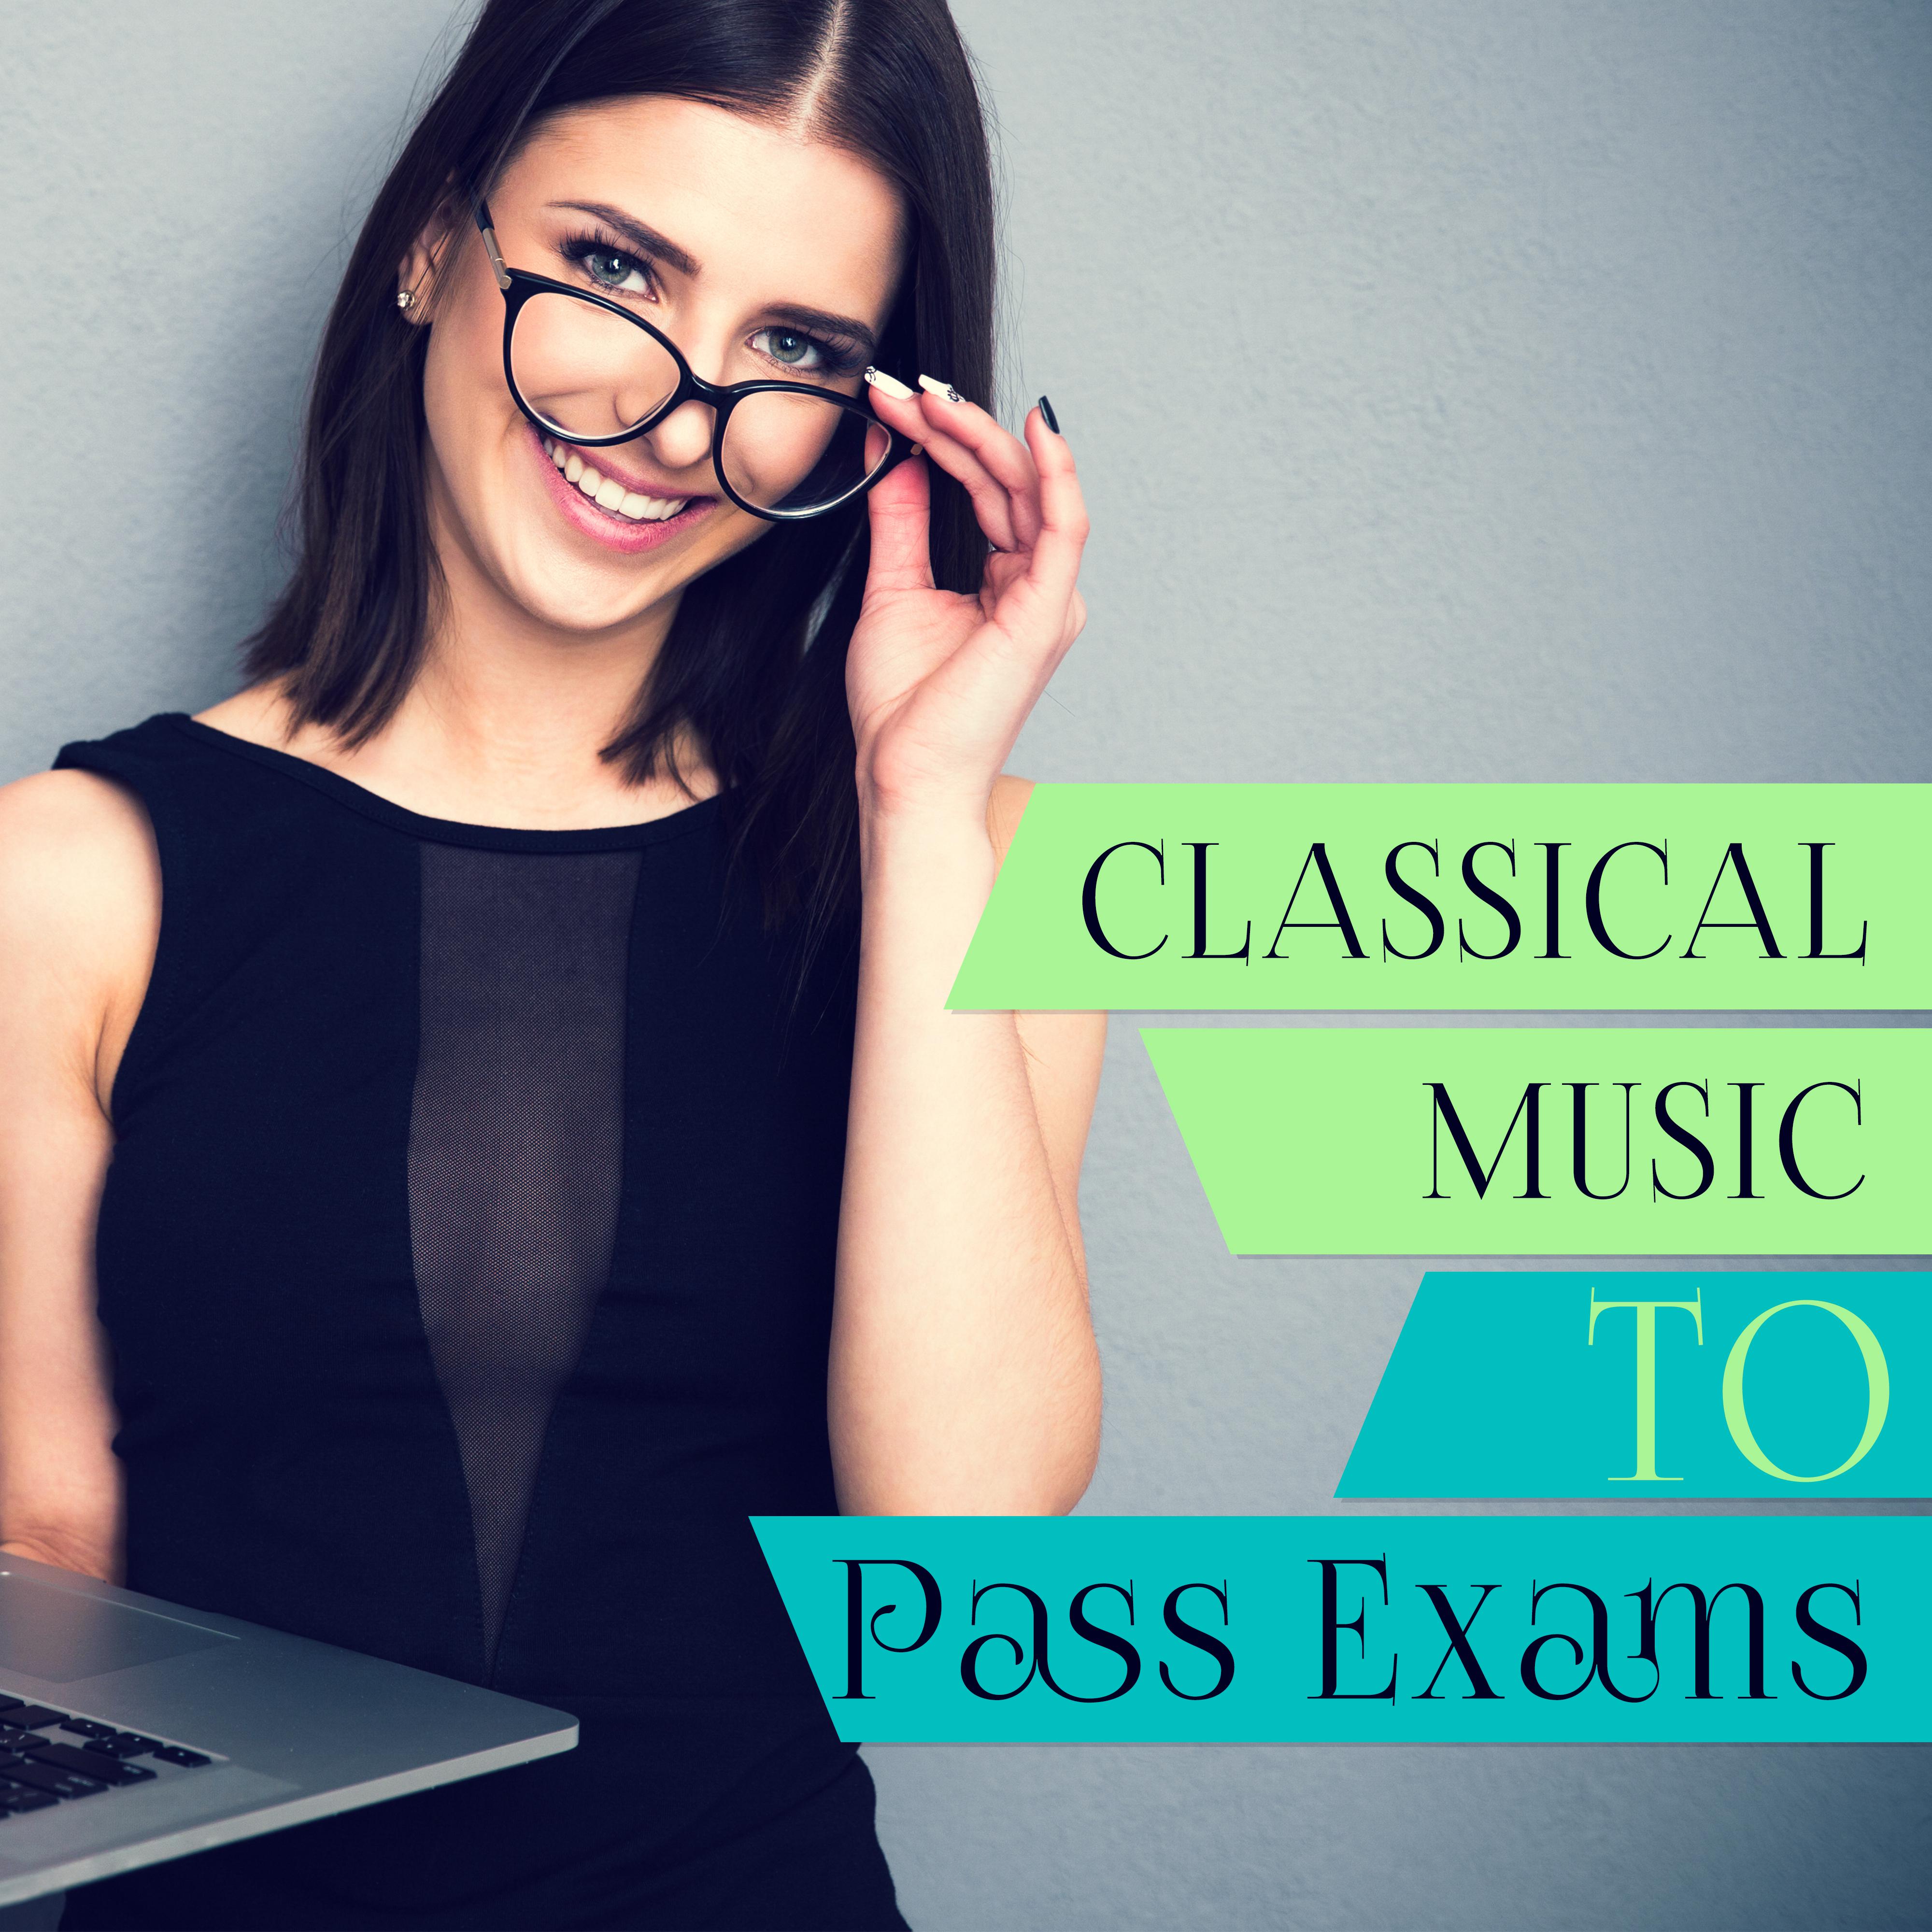 Classical Music to Pass Exams  Soft Classics Songs, Focus on Task with Mozart, Piano Relaxation